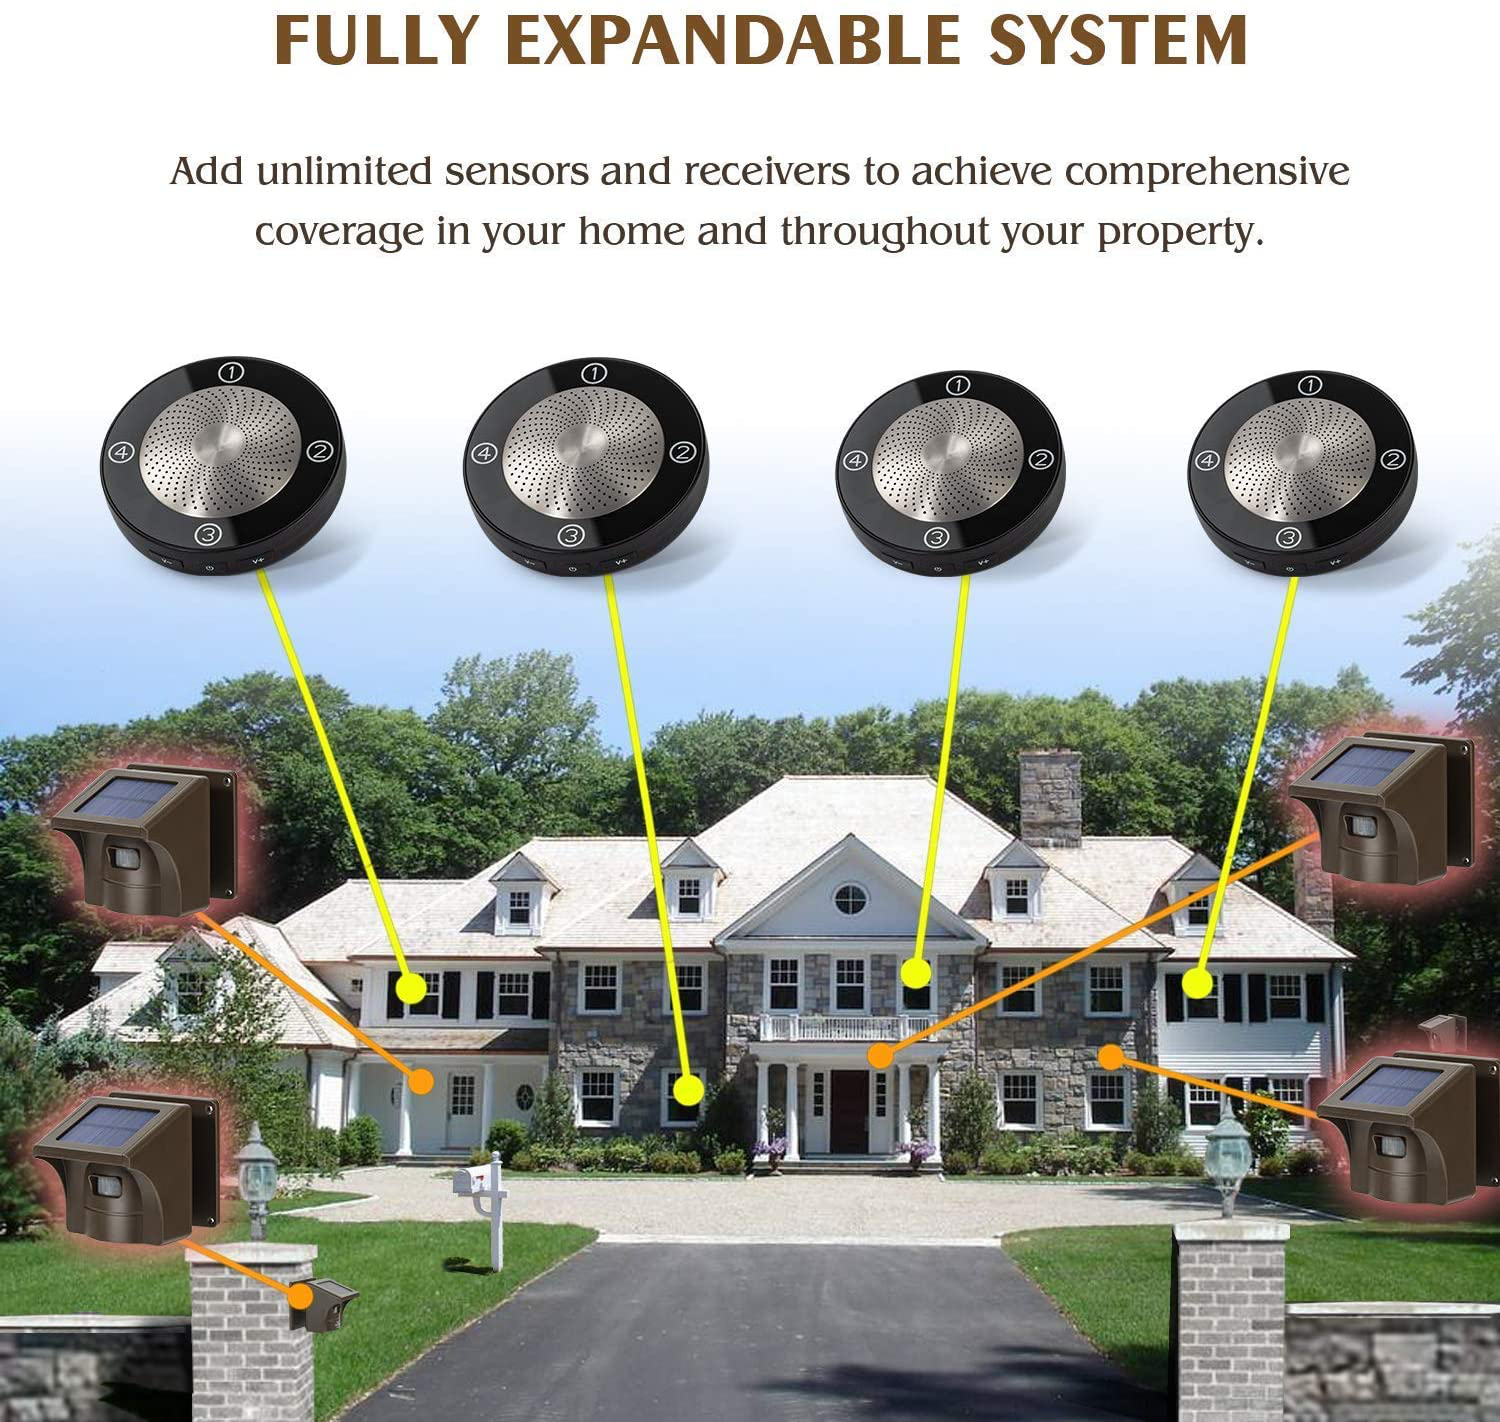 1/2 Mile Long Range Solar Wireless Driveway Alarm Outdoor Weather Resistant Motion Sensor & Detector-Security Alert System-Monitor & Protect Outside Property,No Need to Replace Battery